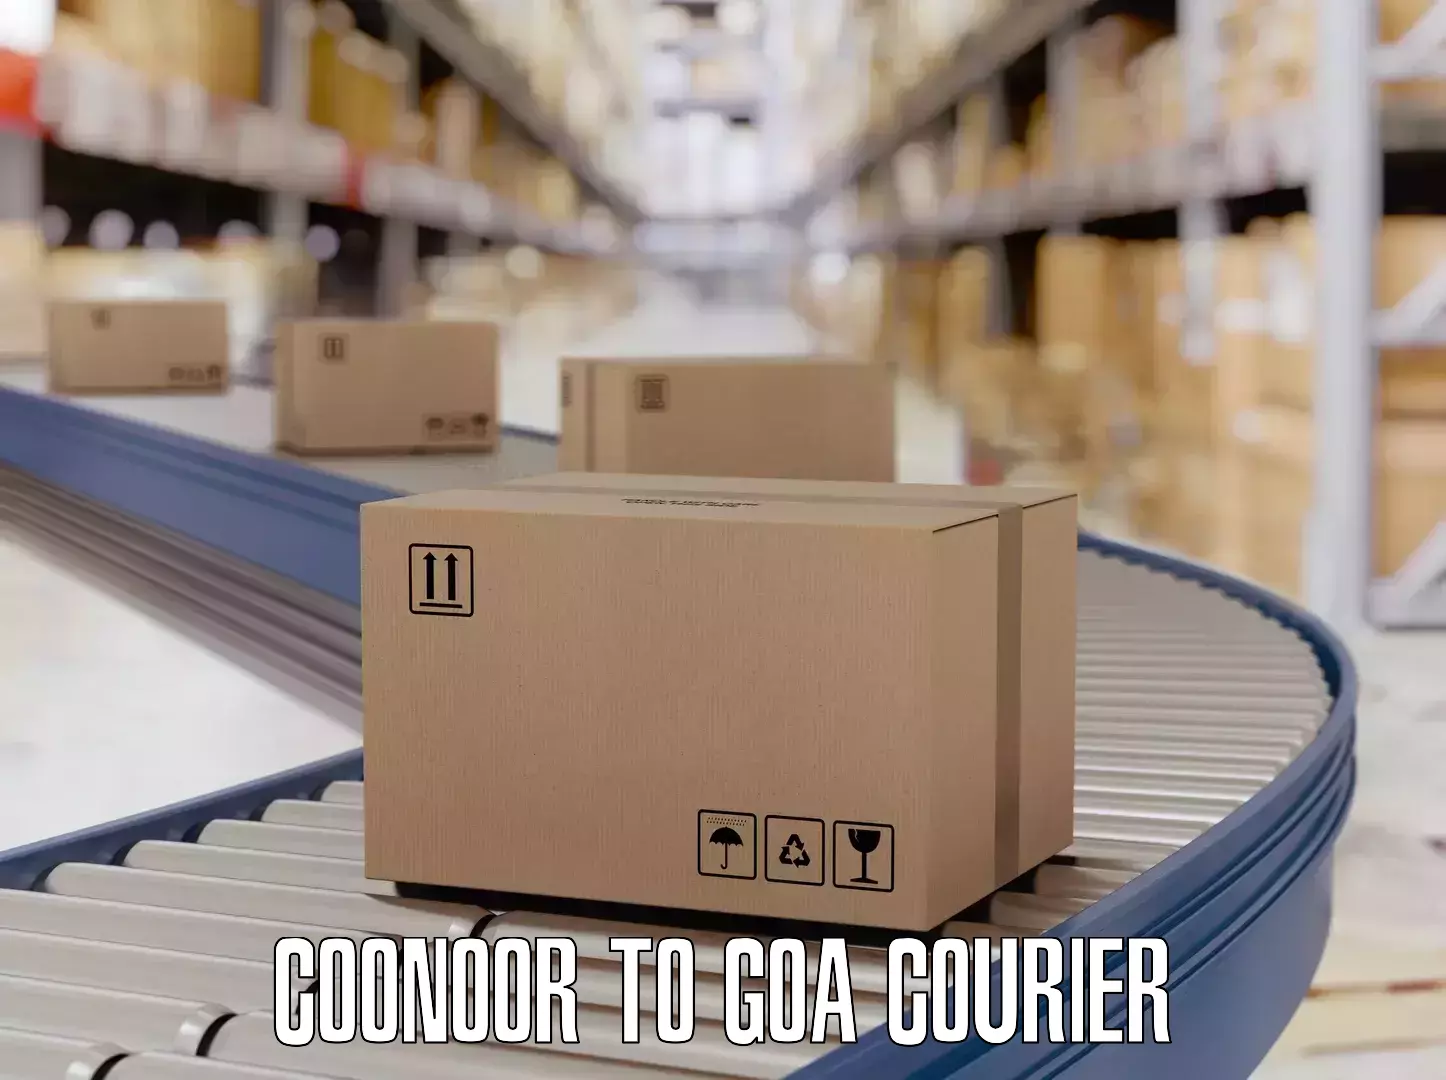 Luggage delivery app Coonoor to Goa